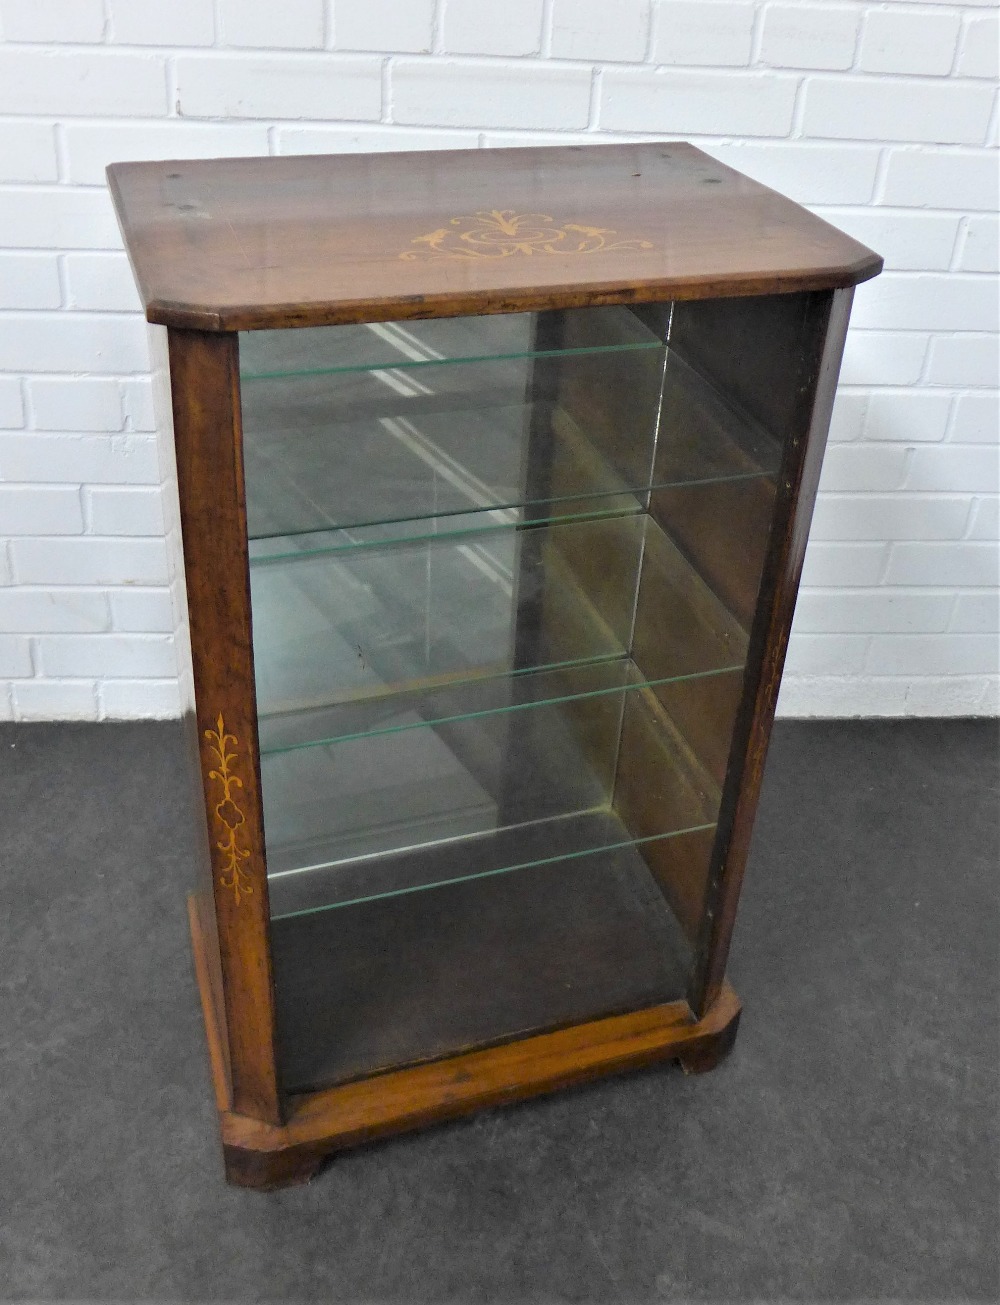 19th century rosewood and inlaid cabinet with glazed interior and glass shelves, 88 x 54cm